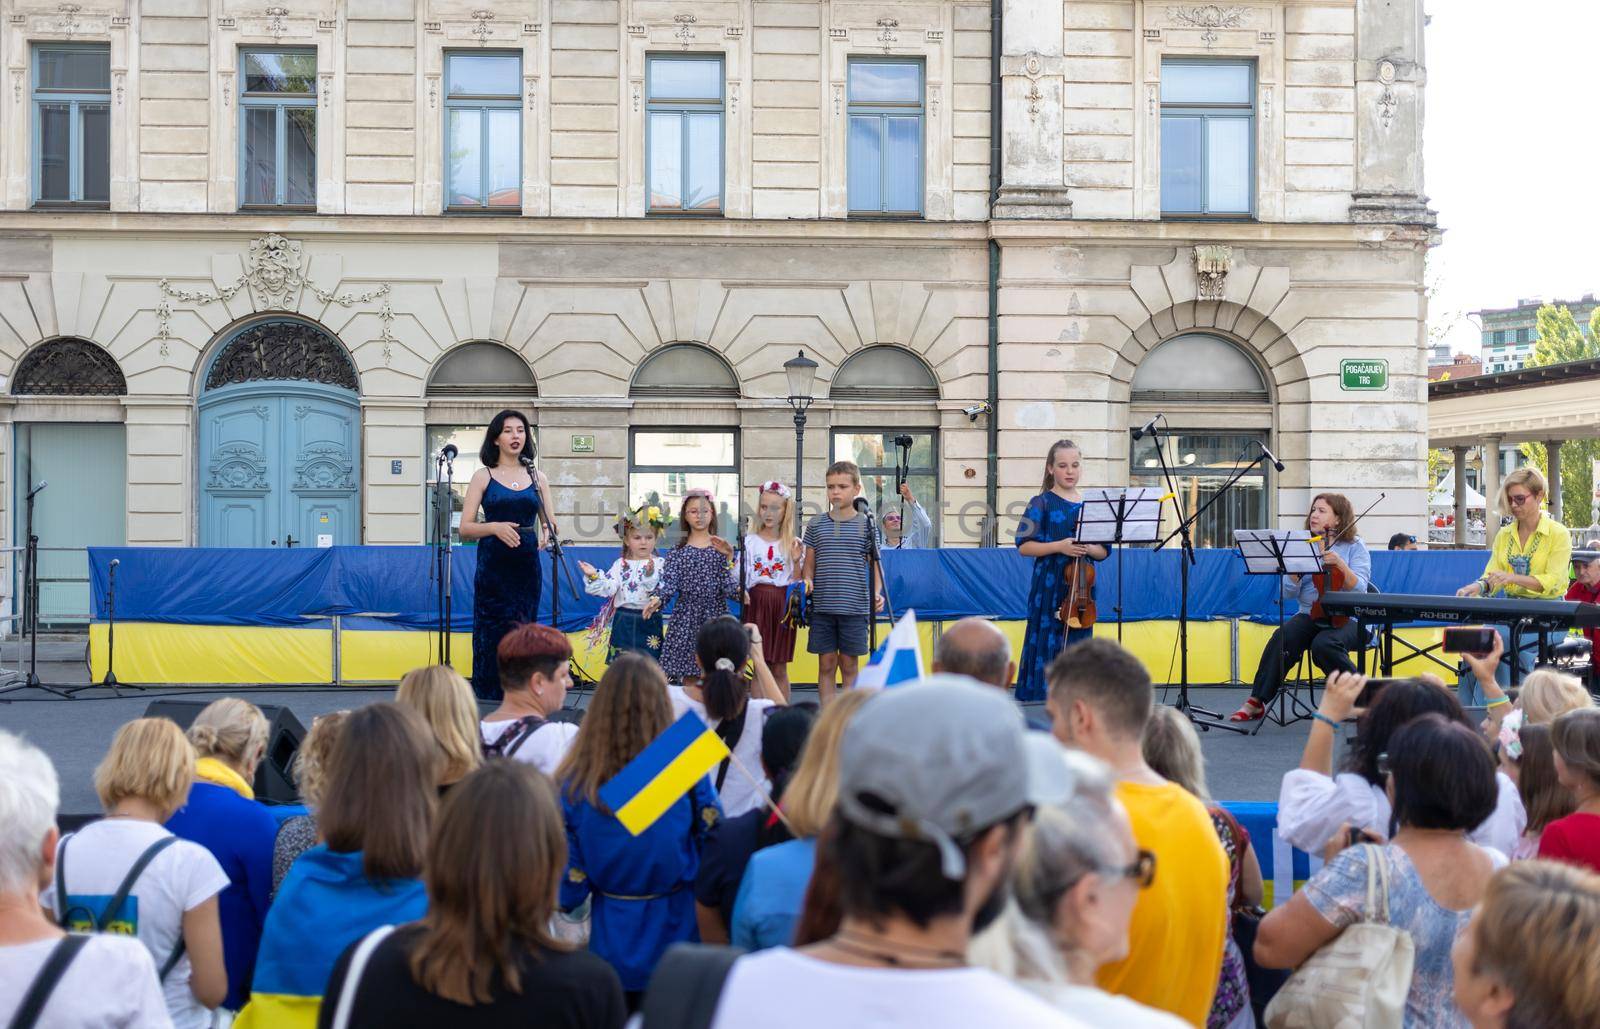 LJUBLJANA, SLOVENIA - August 24, 2022: Ukraine independence day meeting. People with flags and national symbols by Chechotkin